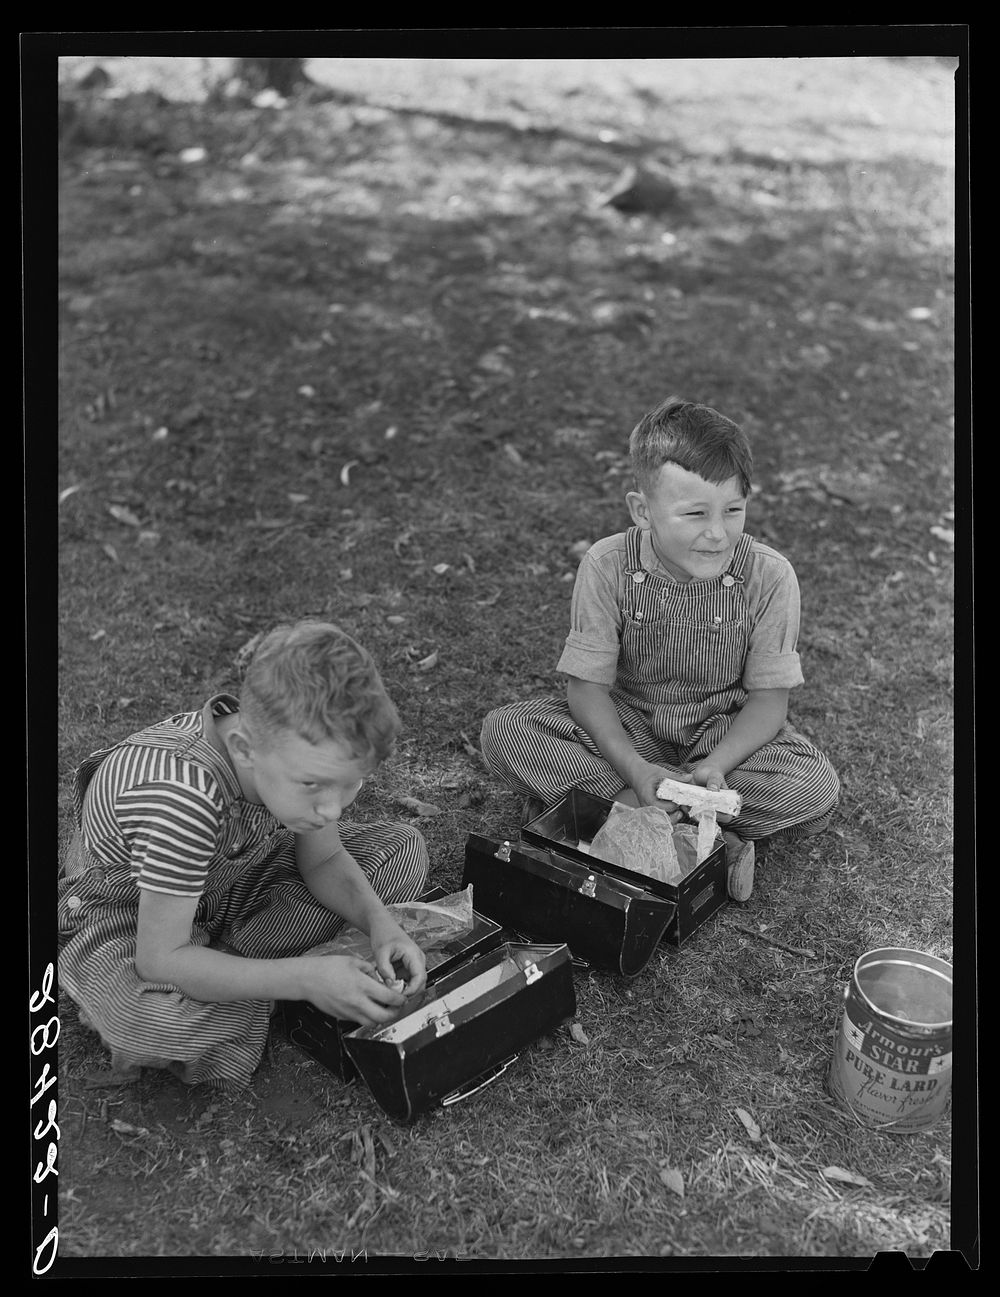 Children (pupils of one-room schoolhouse) eating lunch. Grundy County, Iowa. Sourced from the Library of Congress.